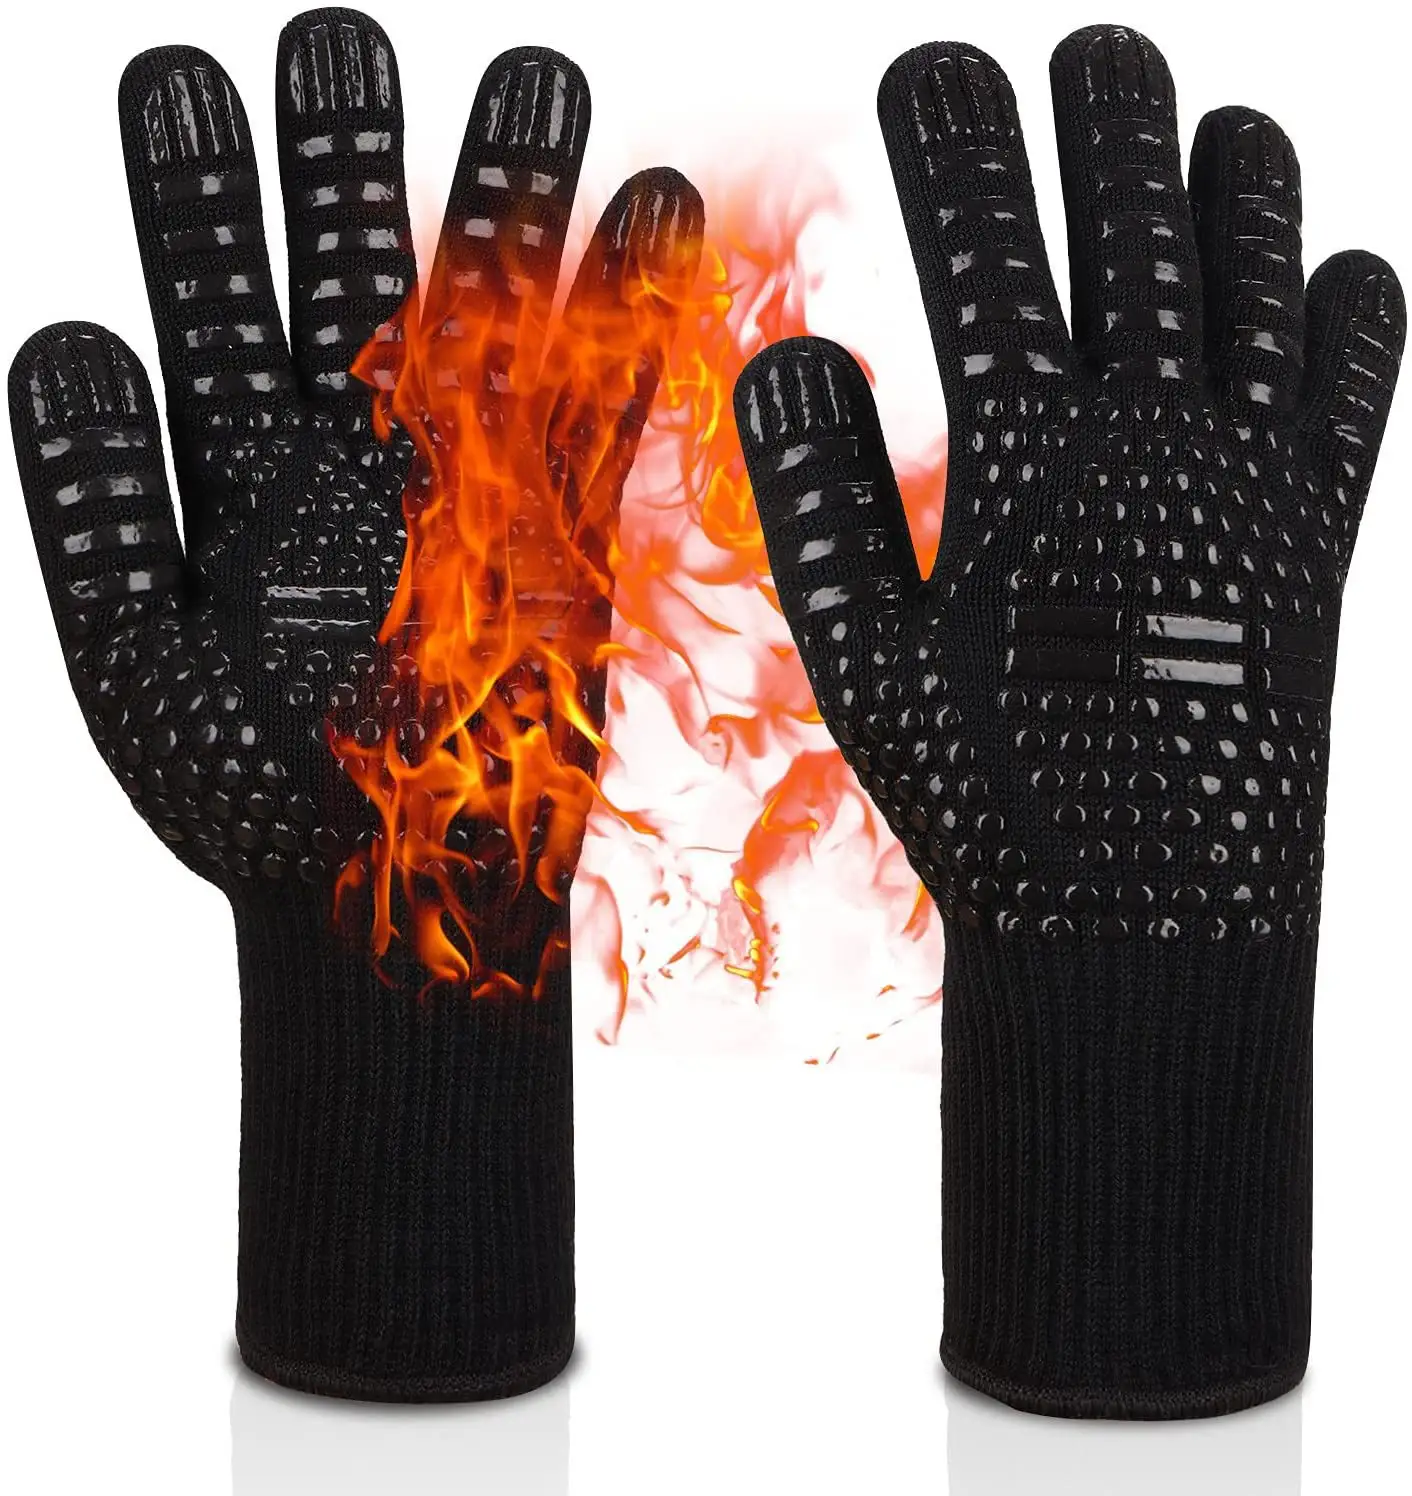 New Aramid Barbecue Cotton Silicone Oven Mitts Gloves Extreme Heat Resistant Glove Grill BBQ Glove for Cooking Baking